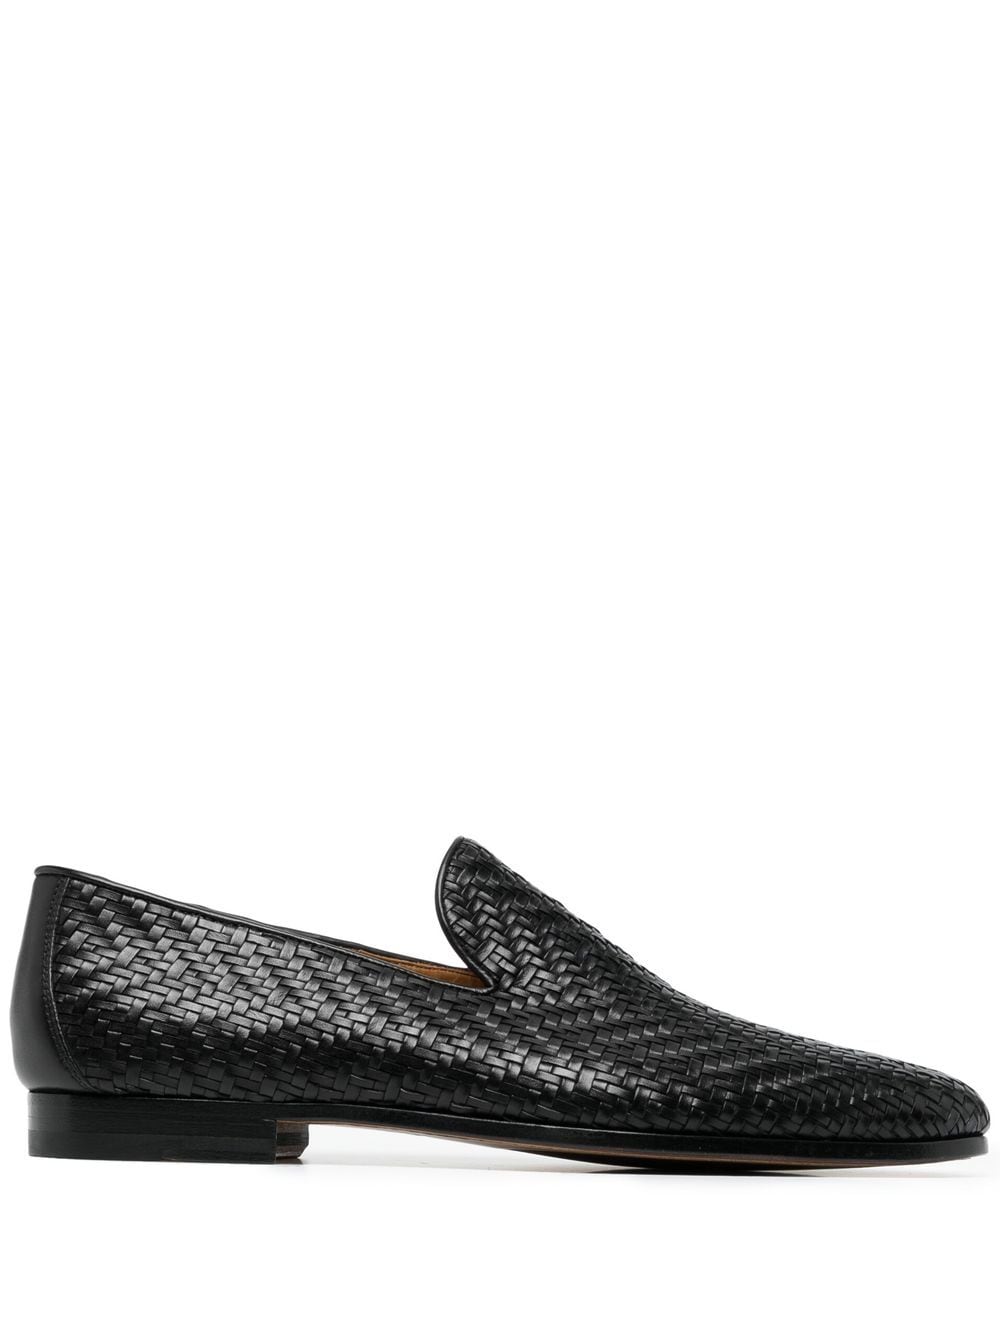 Image 1 of Magnanni interwoven leather loafers